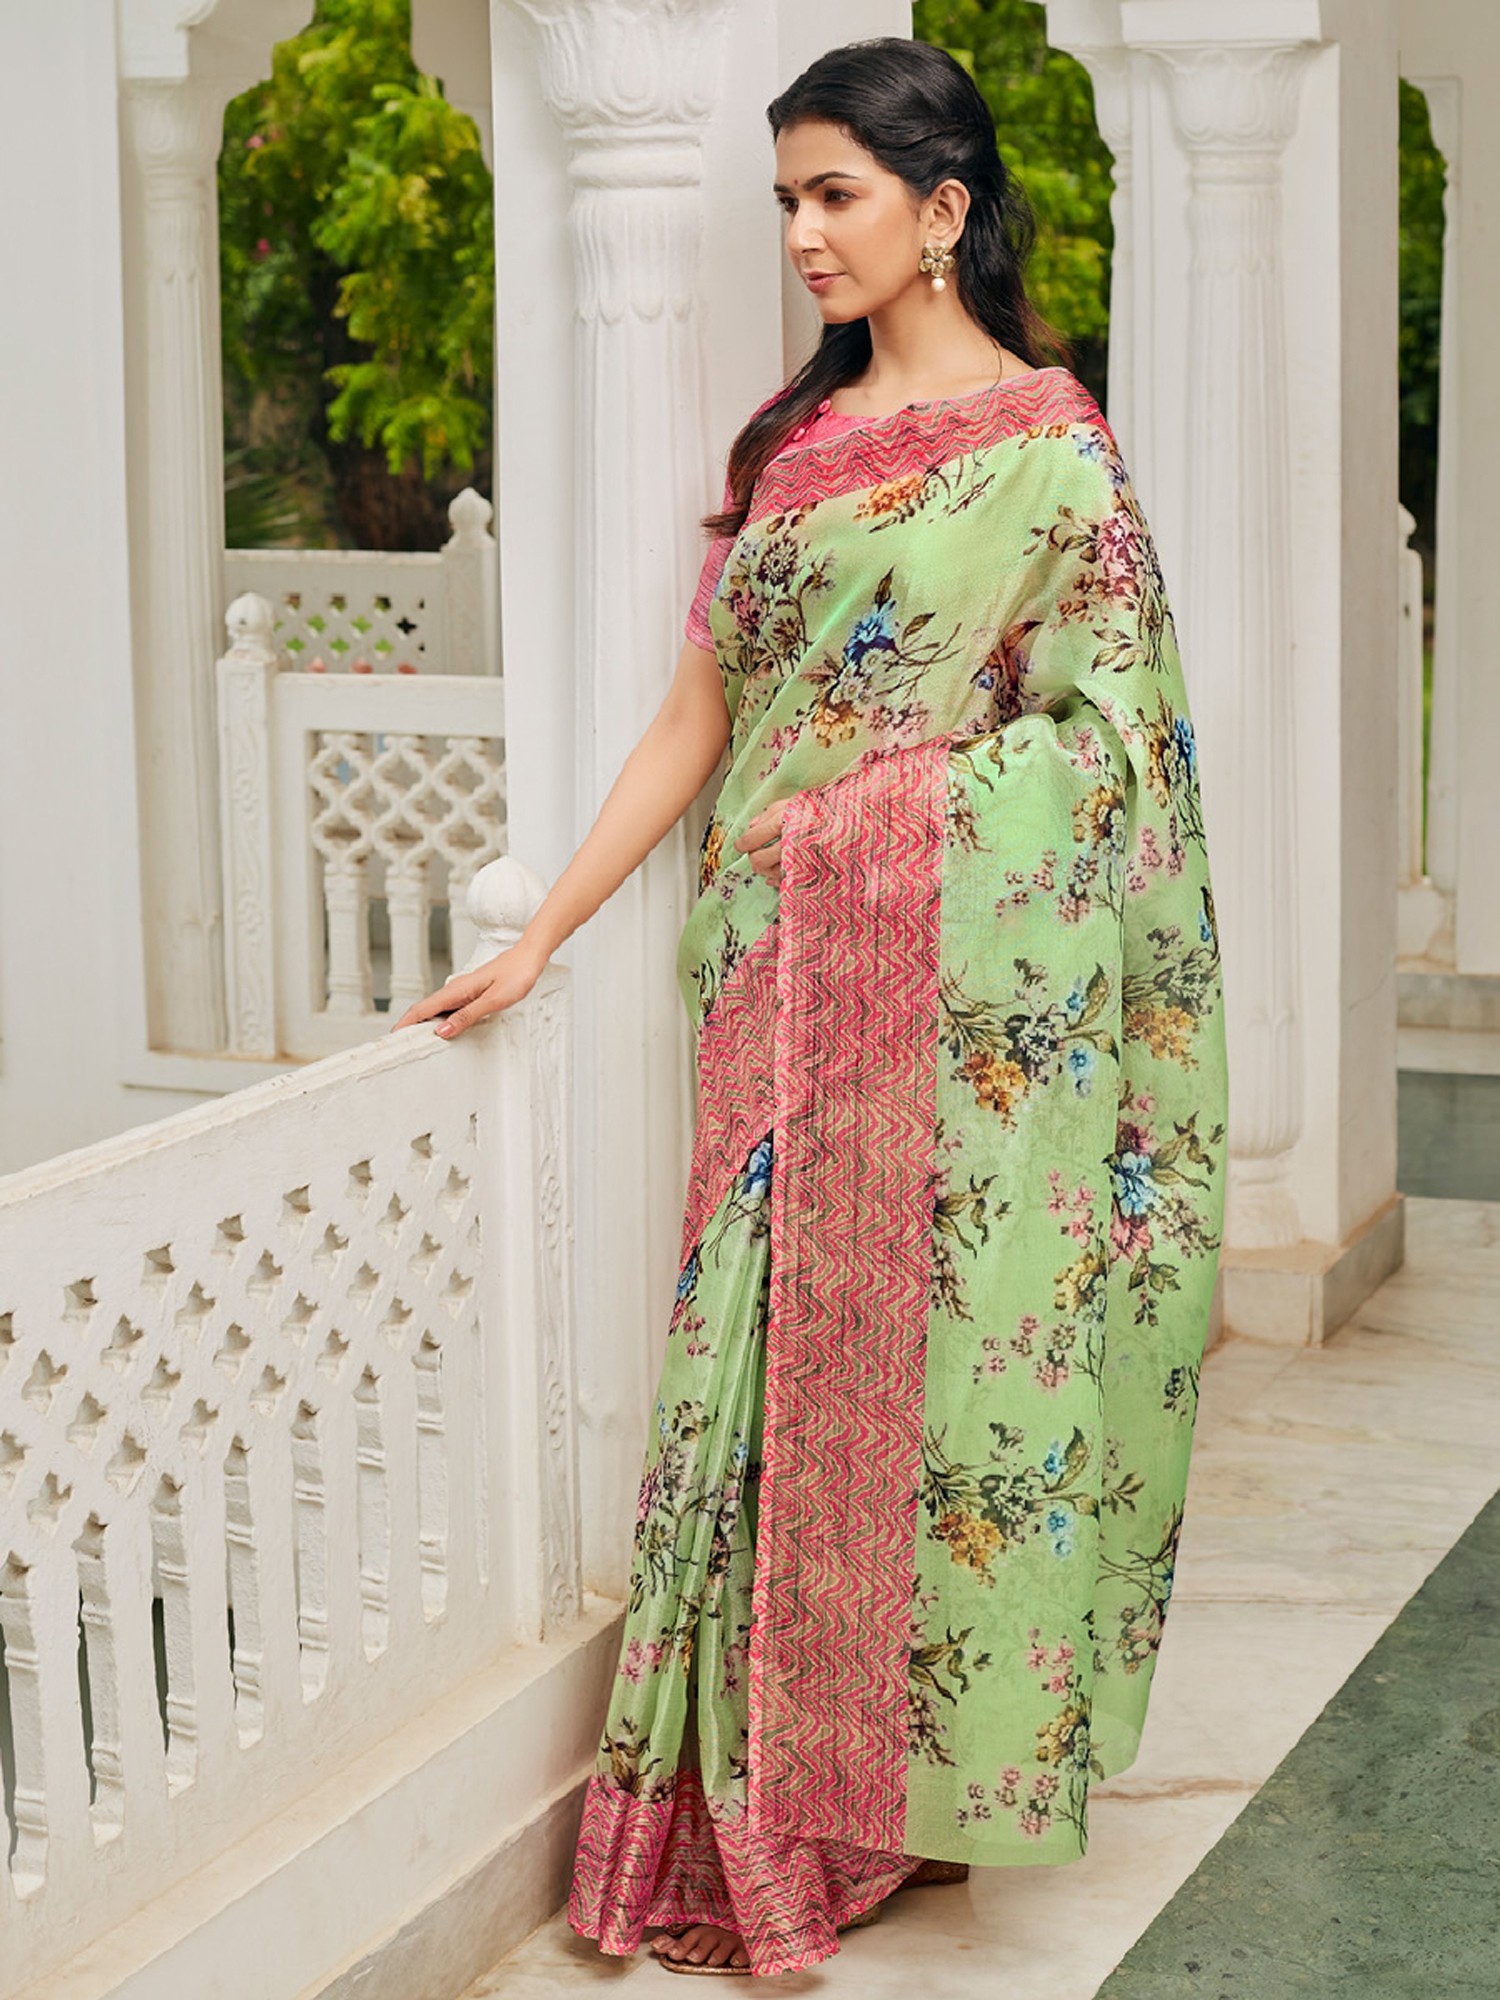 Moonstone Blue Saree in Organza Floral Printed with Sequins